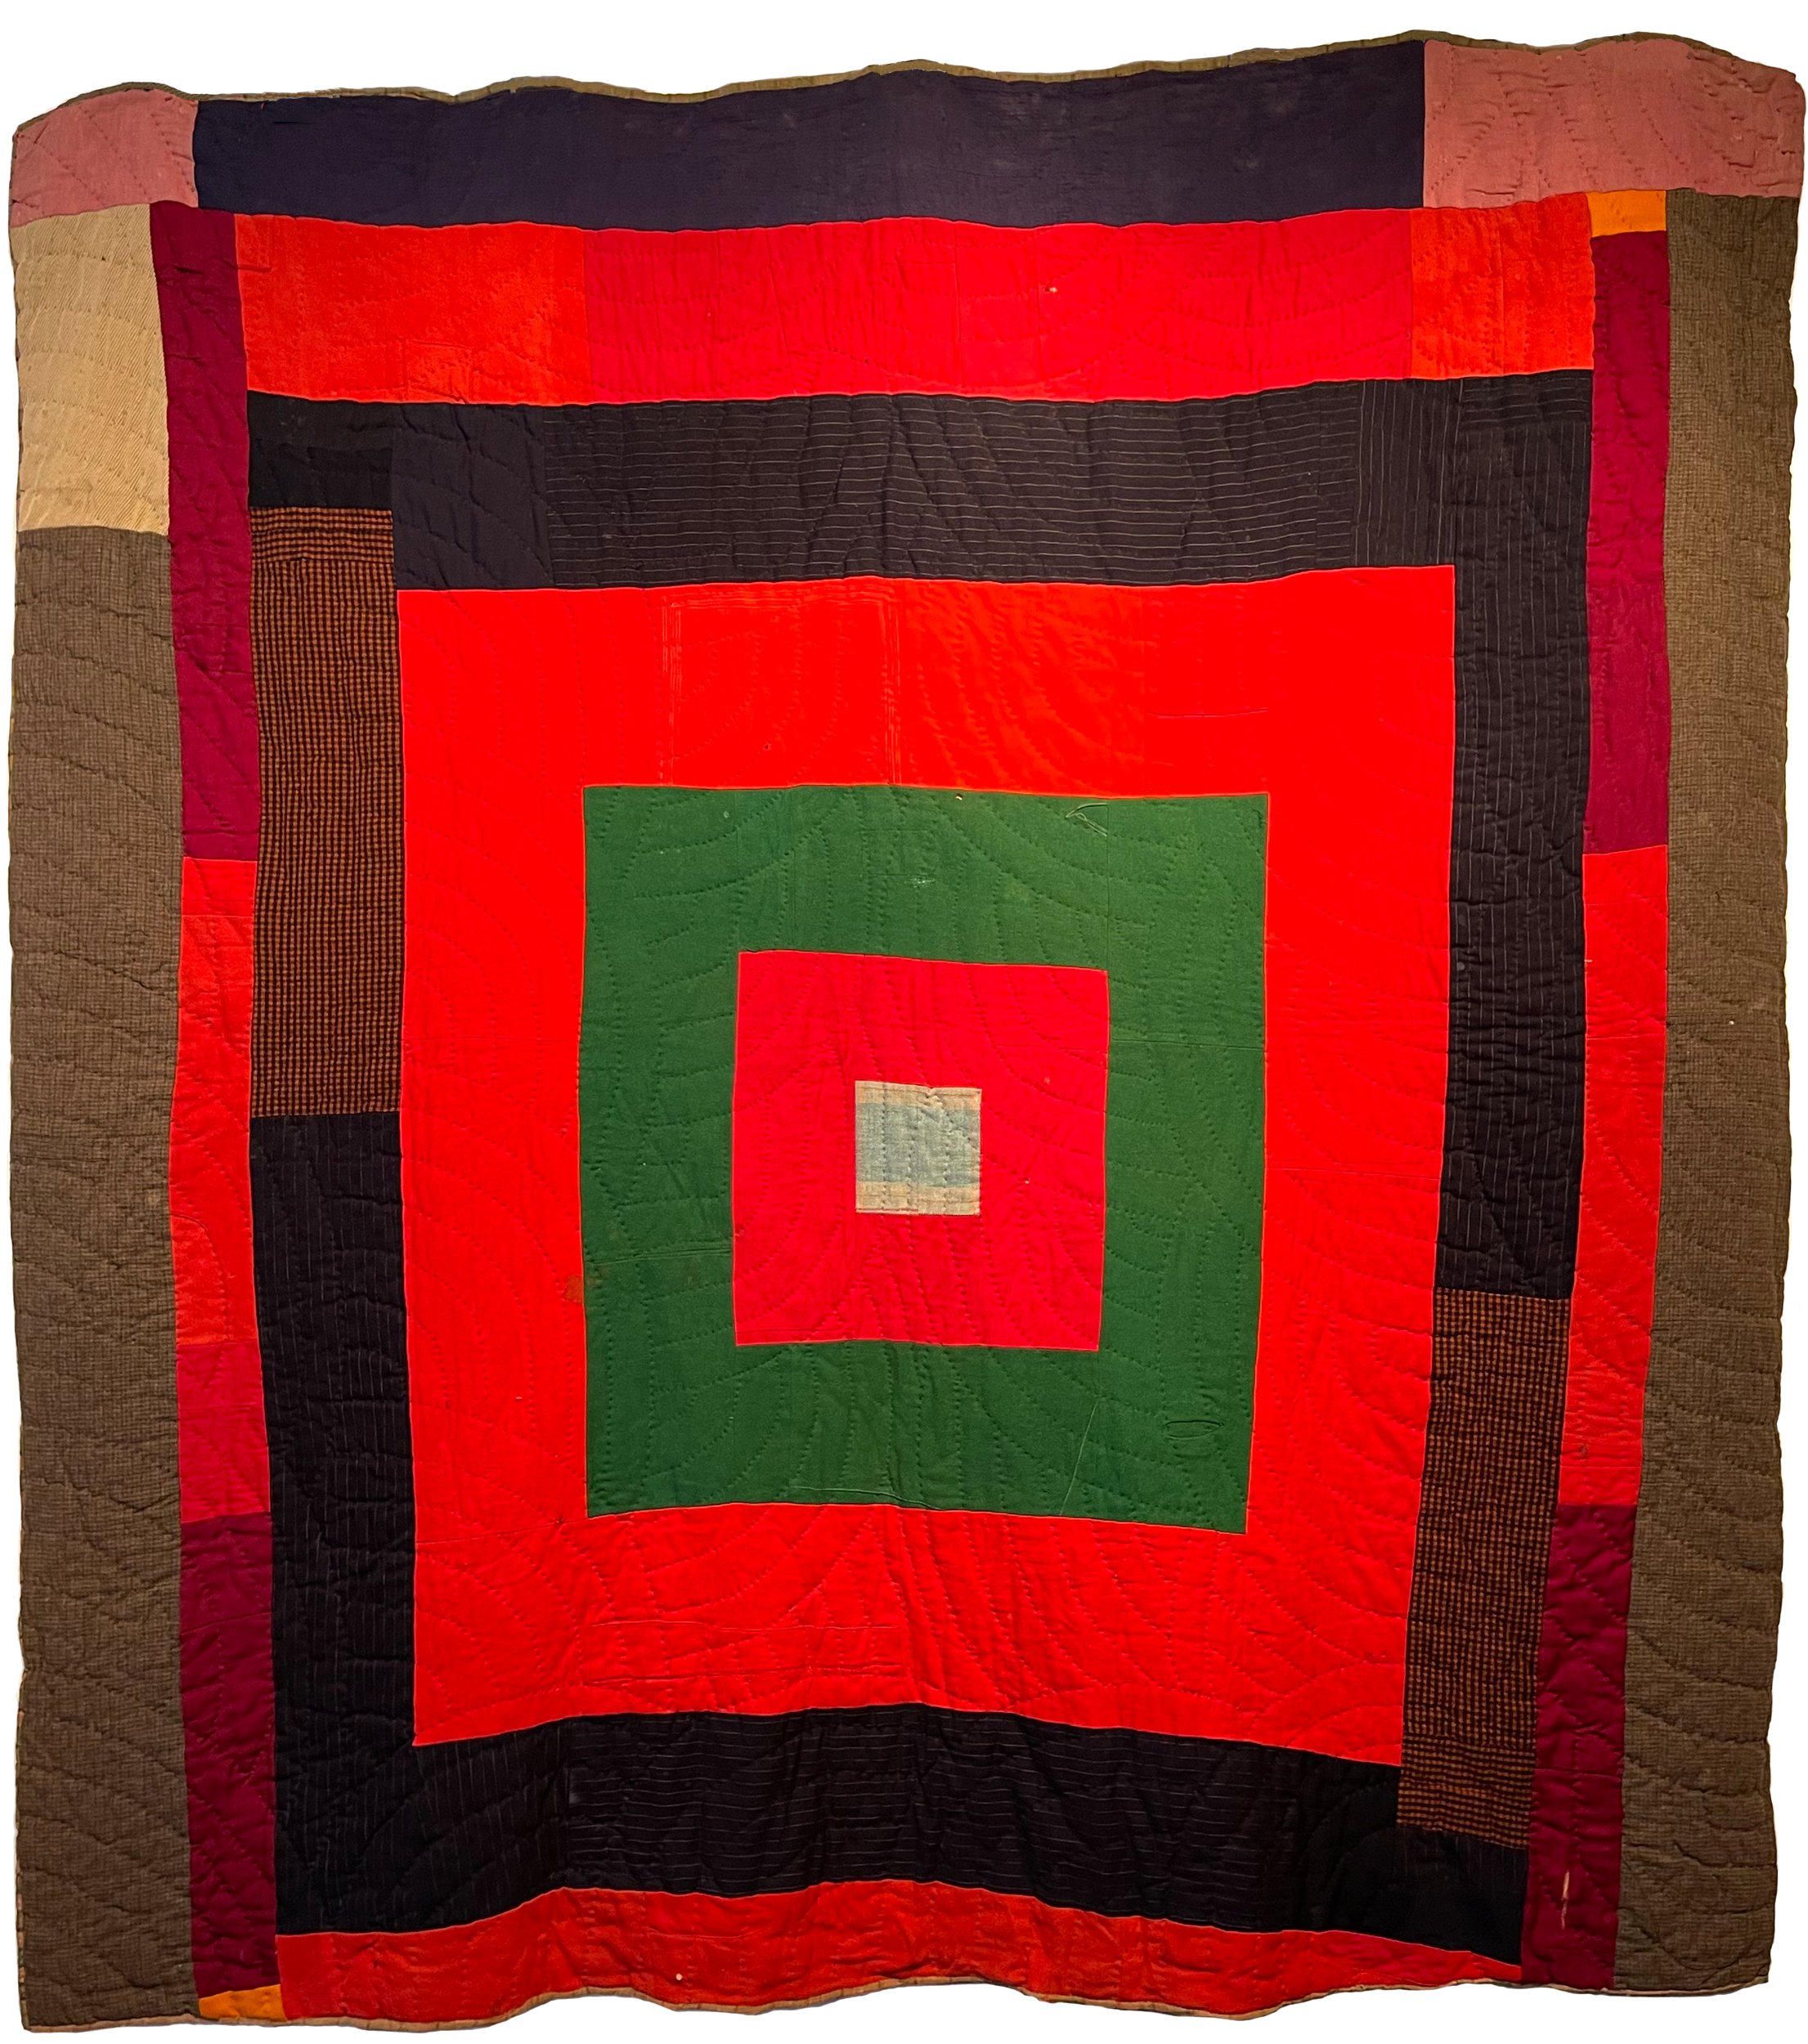   Quilt #157   Circa 1940s. 80" x 80", various fabrics; hand-pieced, hand-quilted. Found around AL/GA line.    ASK ABOUT THIS WORK   